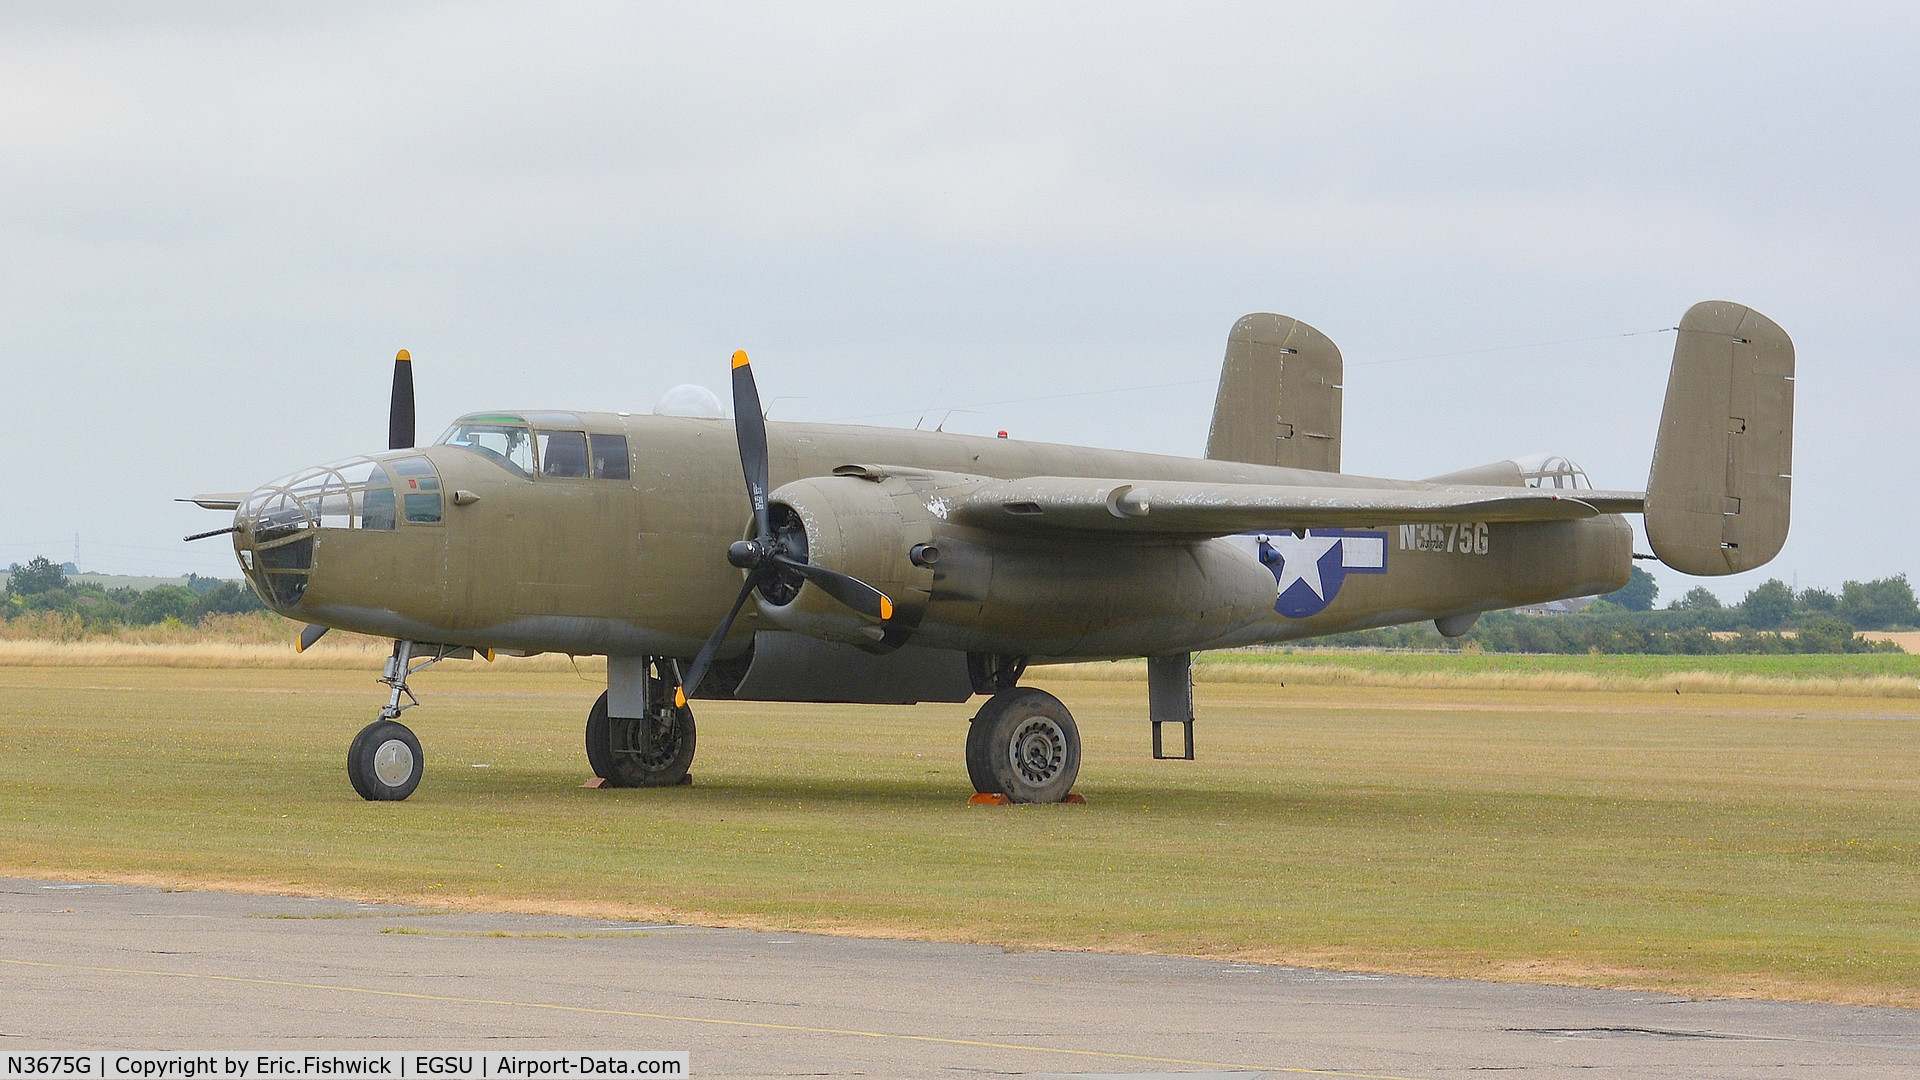 N3675G, 1944 North American B-25J Mitchell Mitchell C/N 108-33698, N3675G – 'Photo Fanny' visiting The Imperial War Museum, Duxford, USA July. 2018.